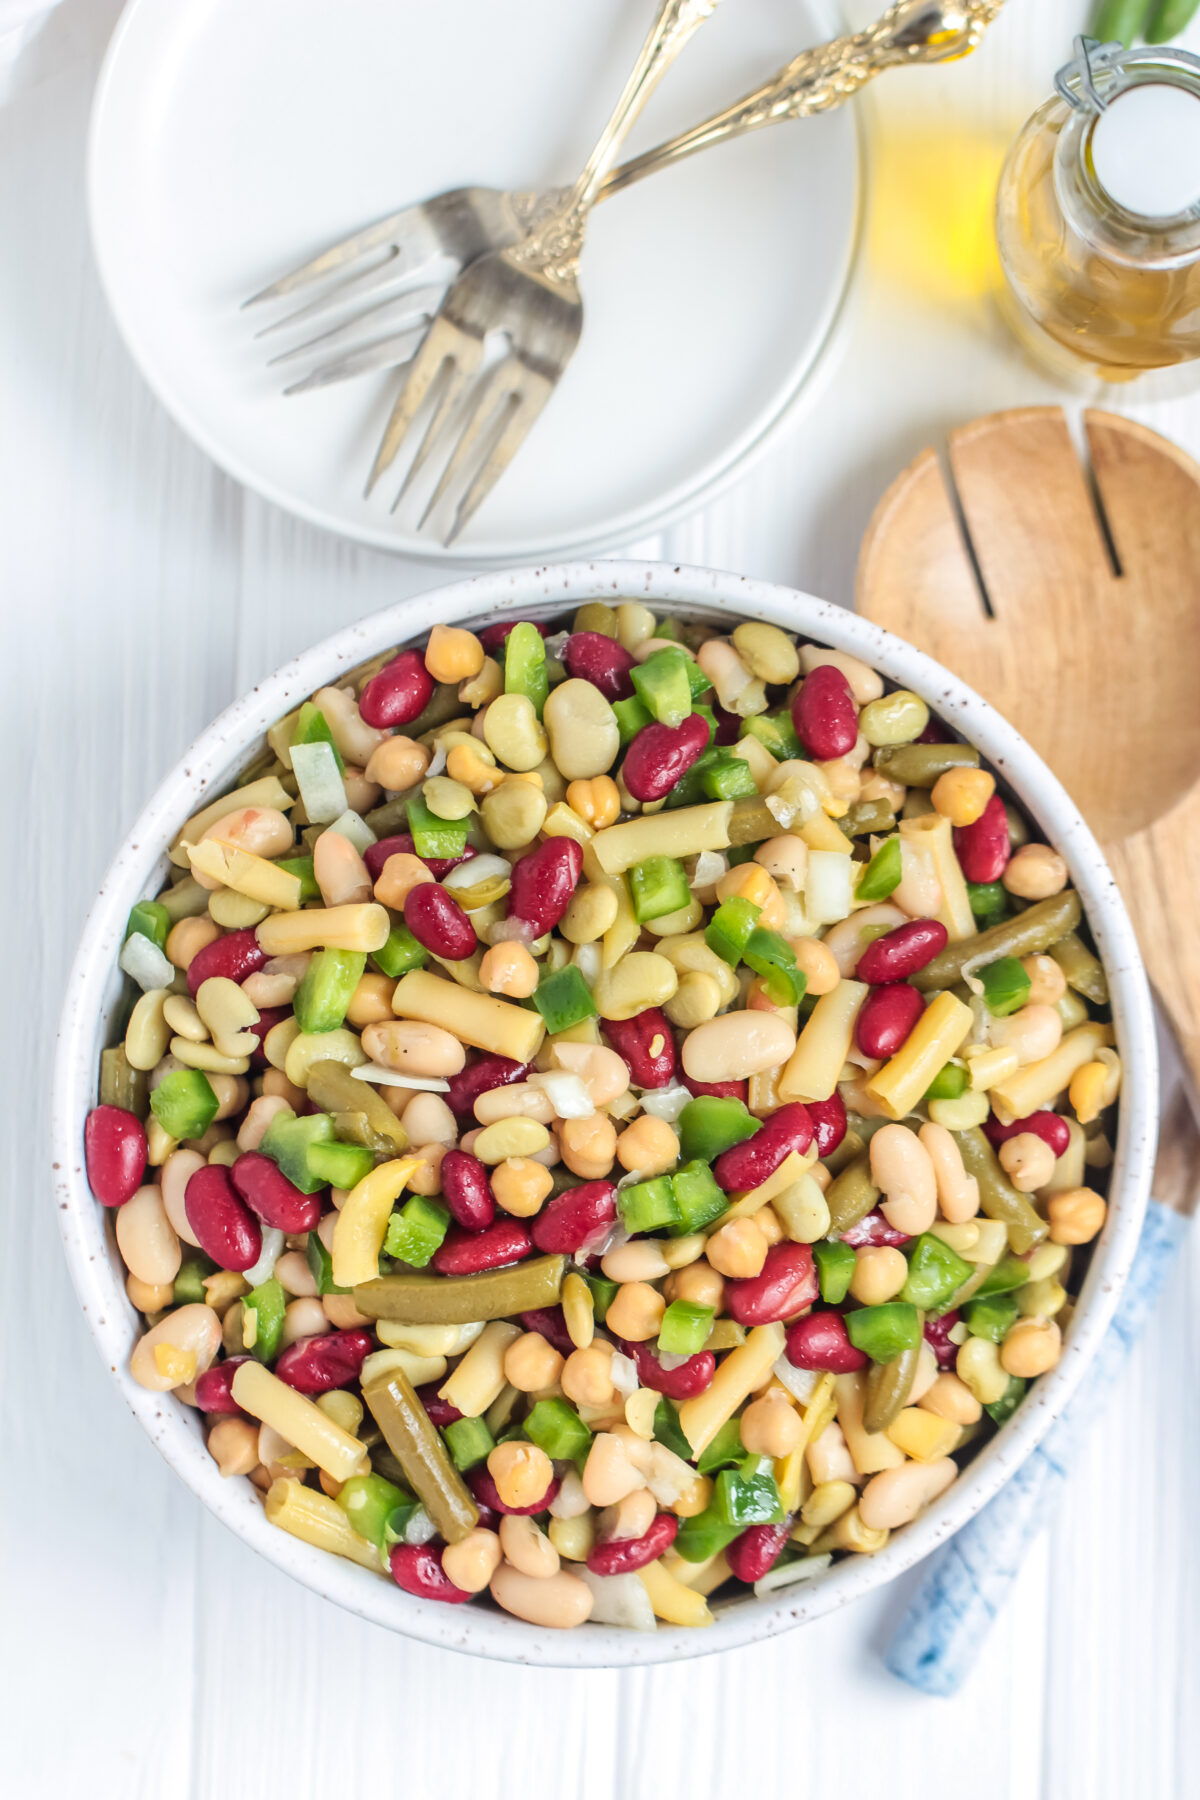 This is the BEST 5 bean salad recipe for potlucks, BBQs, and picnics! It's quick, easy, and affordable - a perfect salad for any budget.